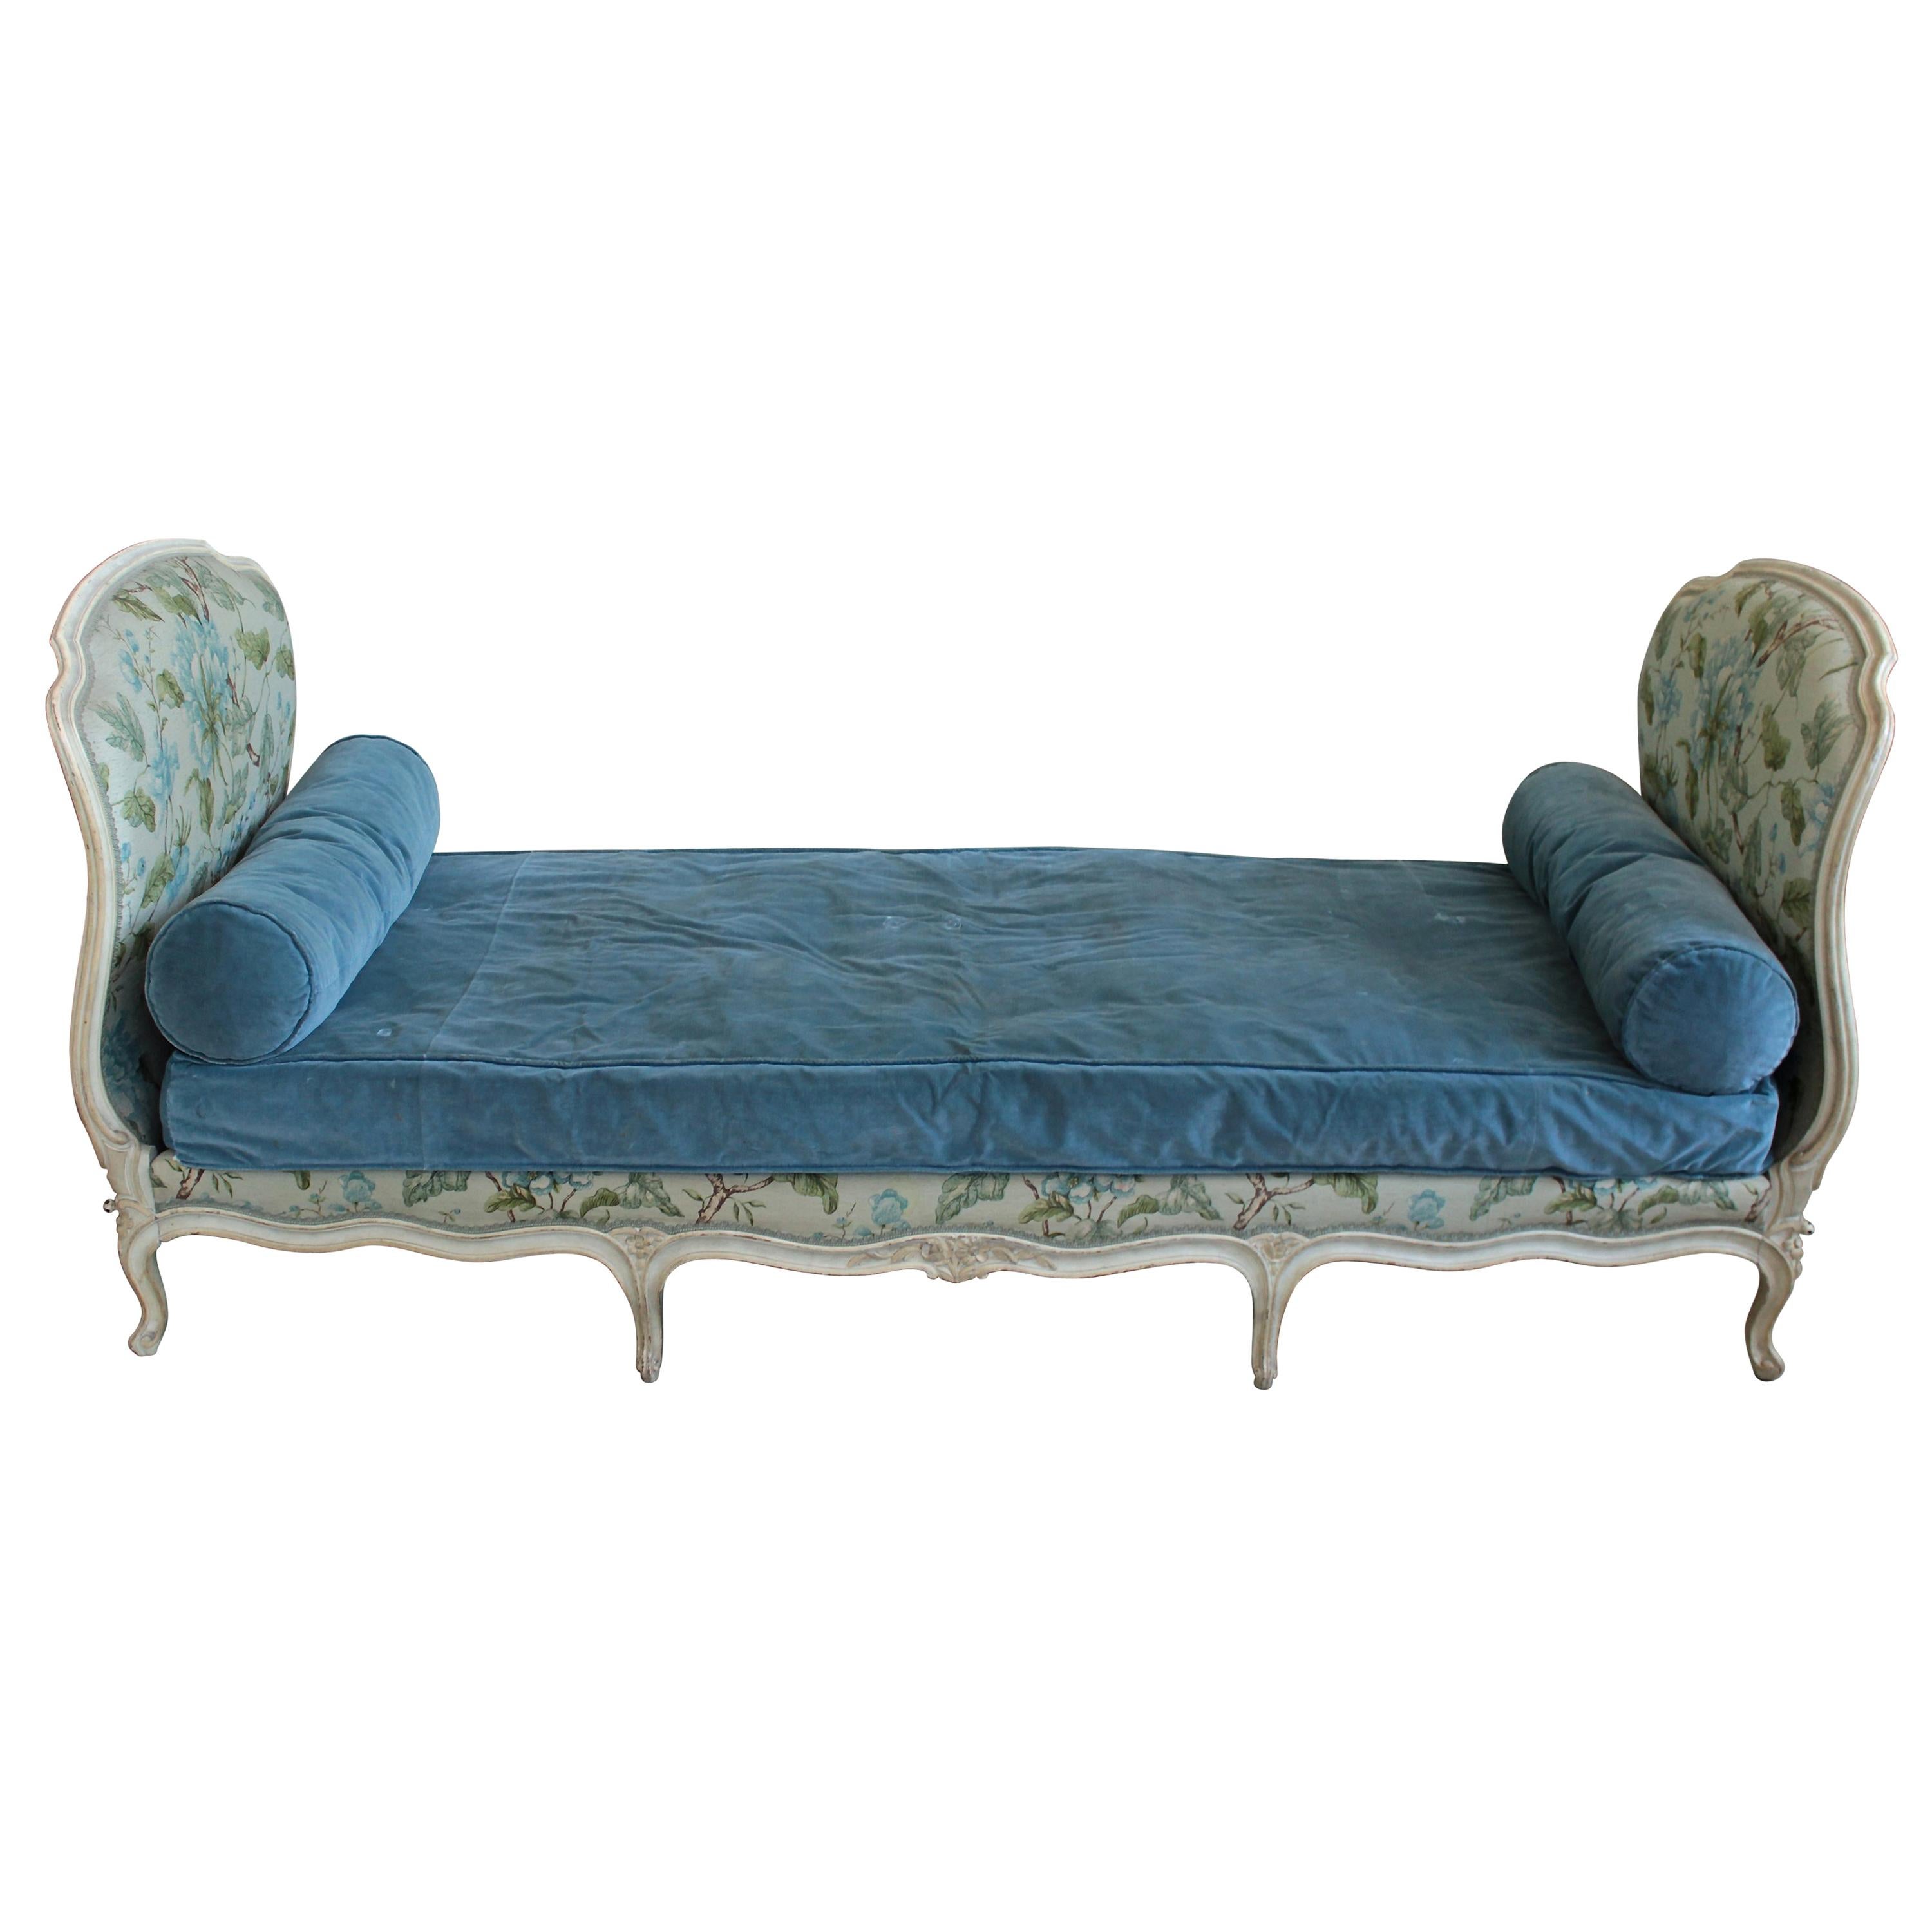 Louis XV Style Daybed with Floral Upholstery